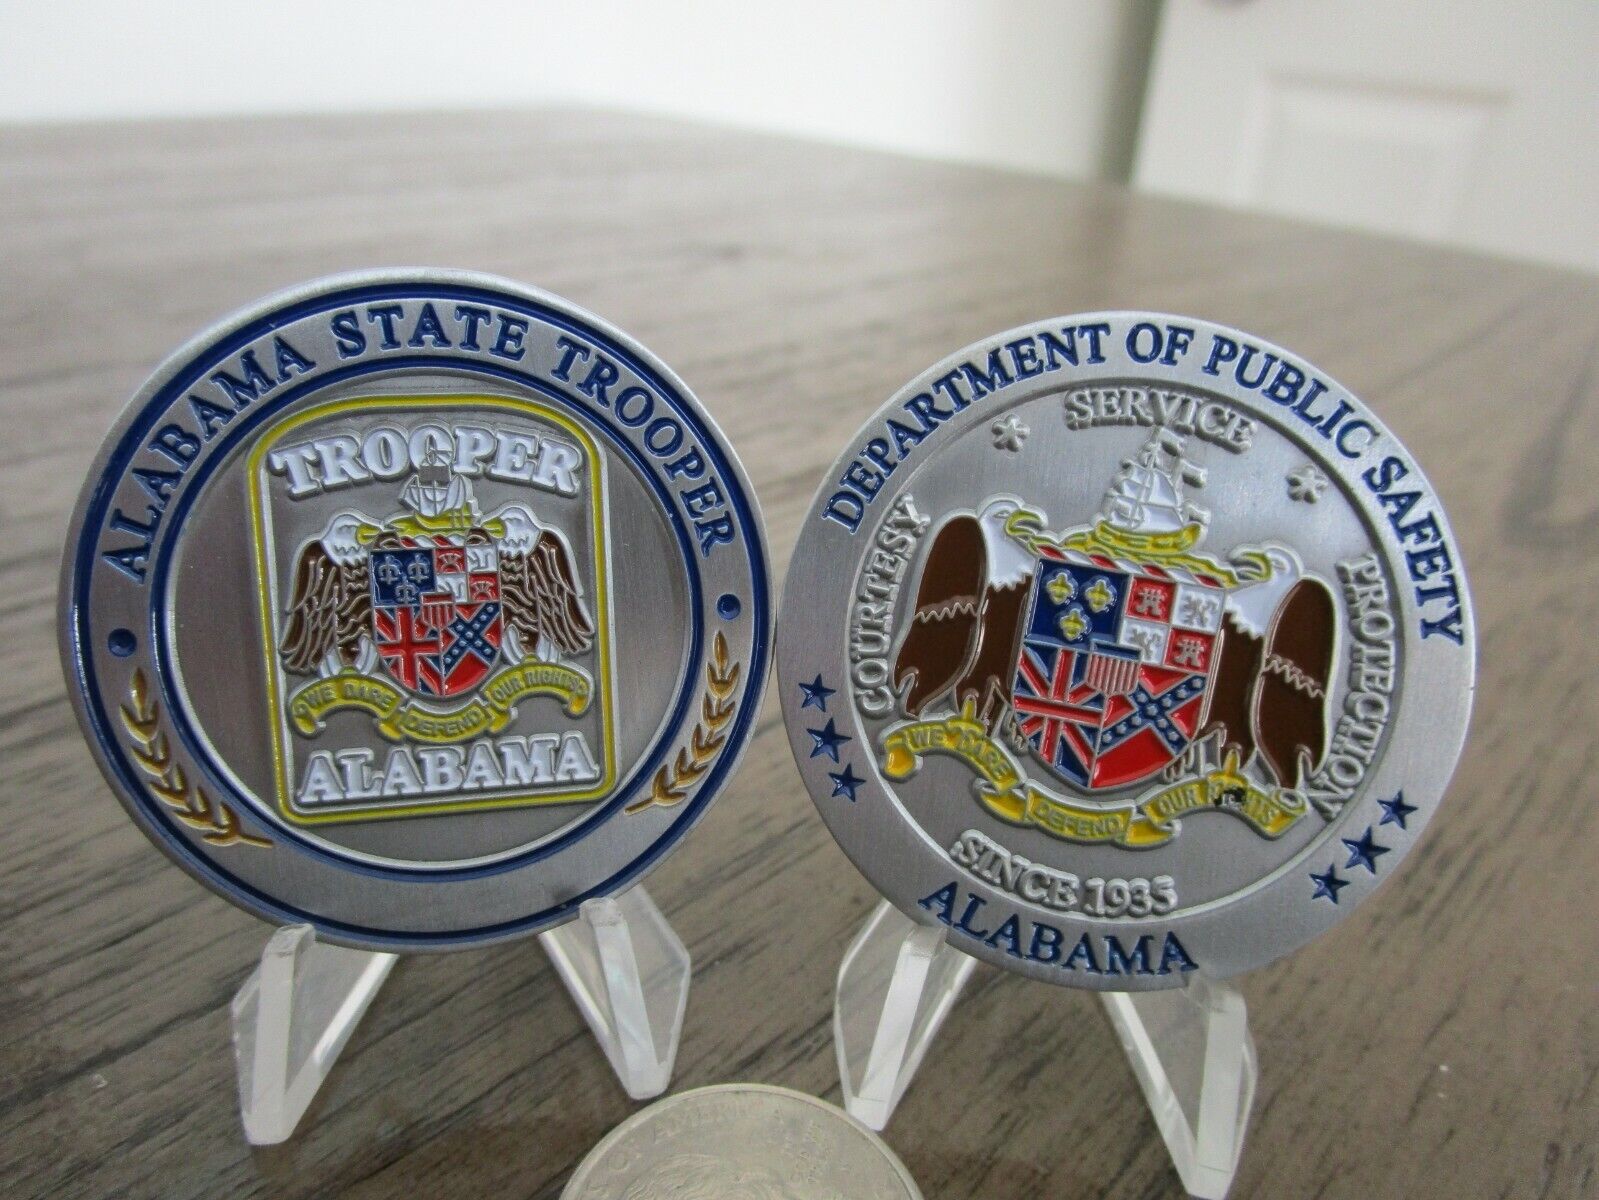 Alabama State Trooper Department of Public Safety Challenge Coin.